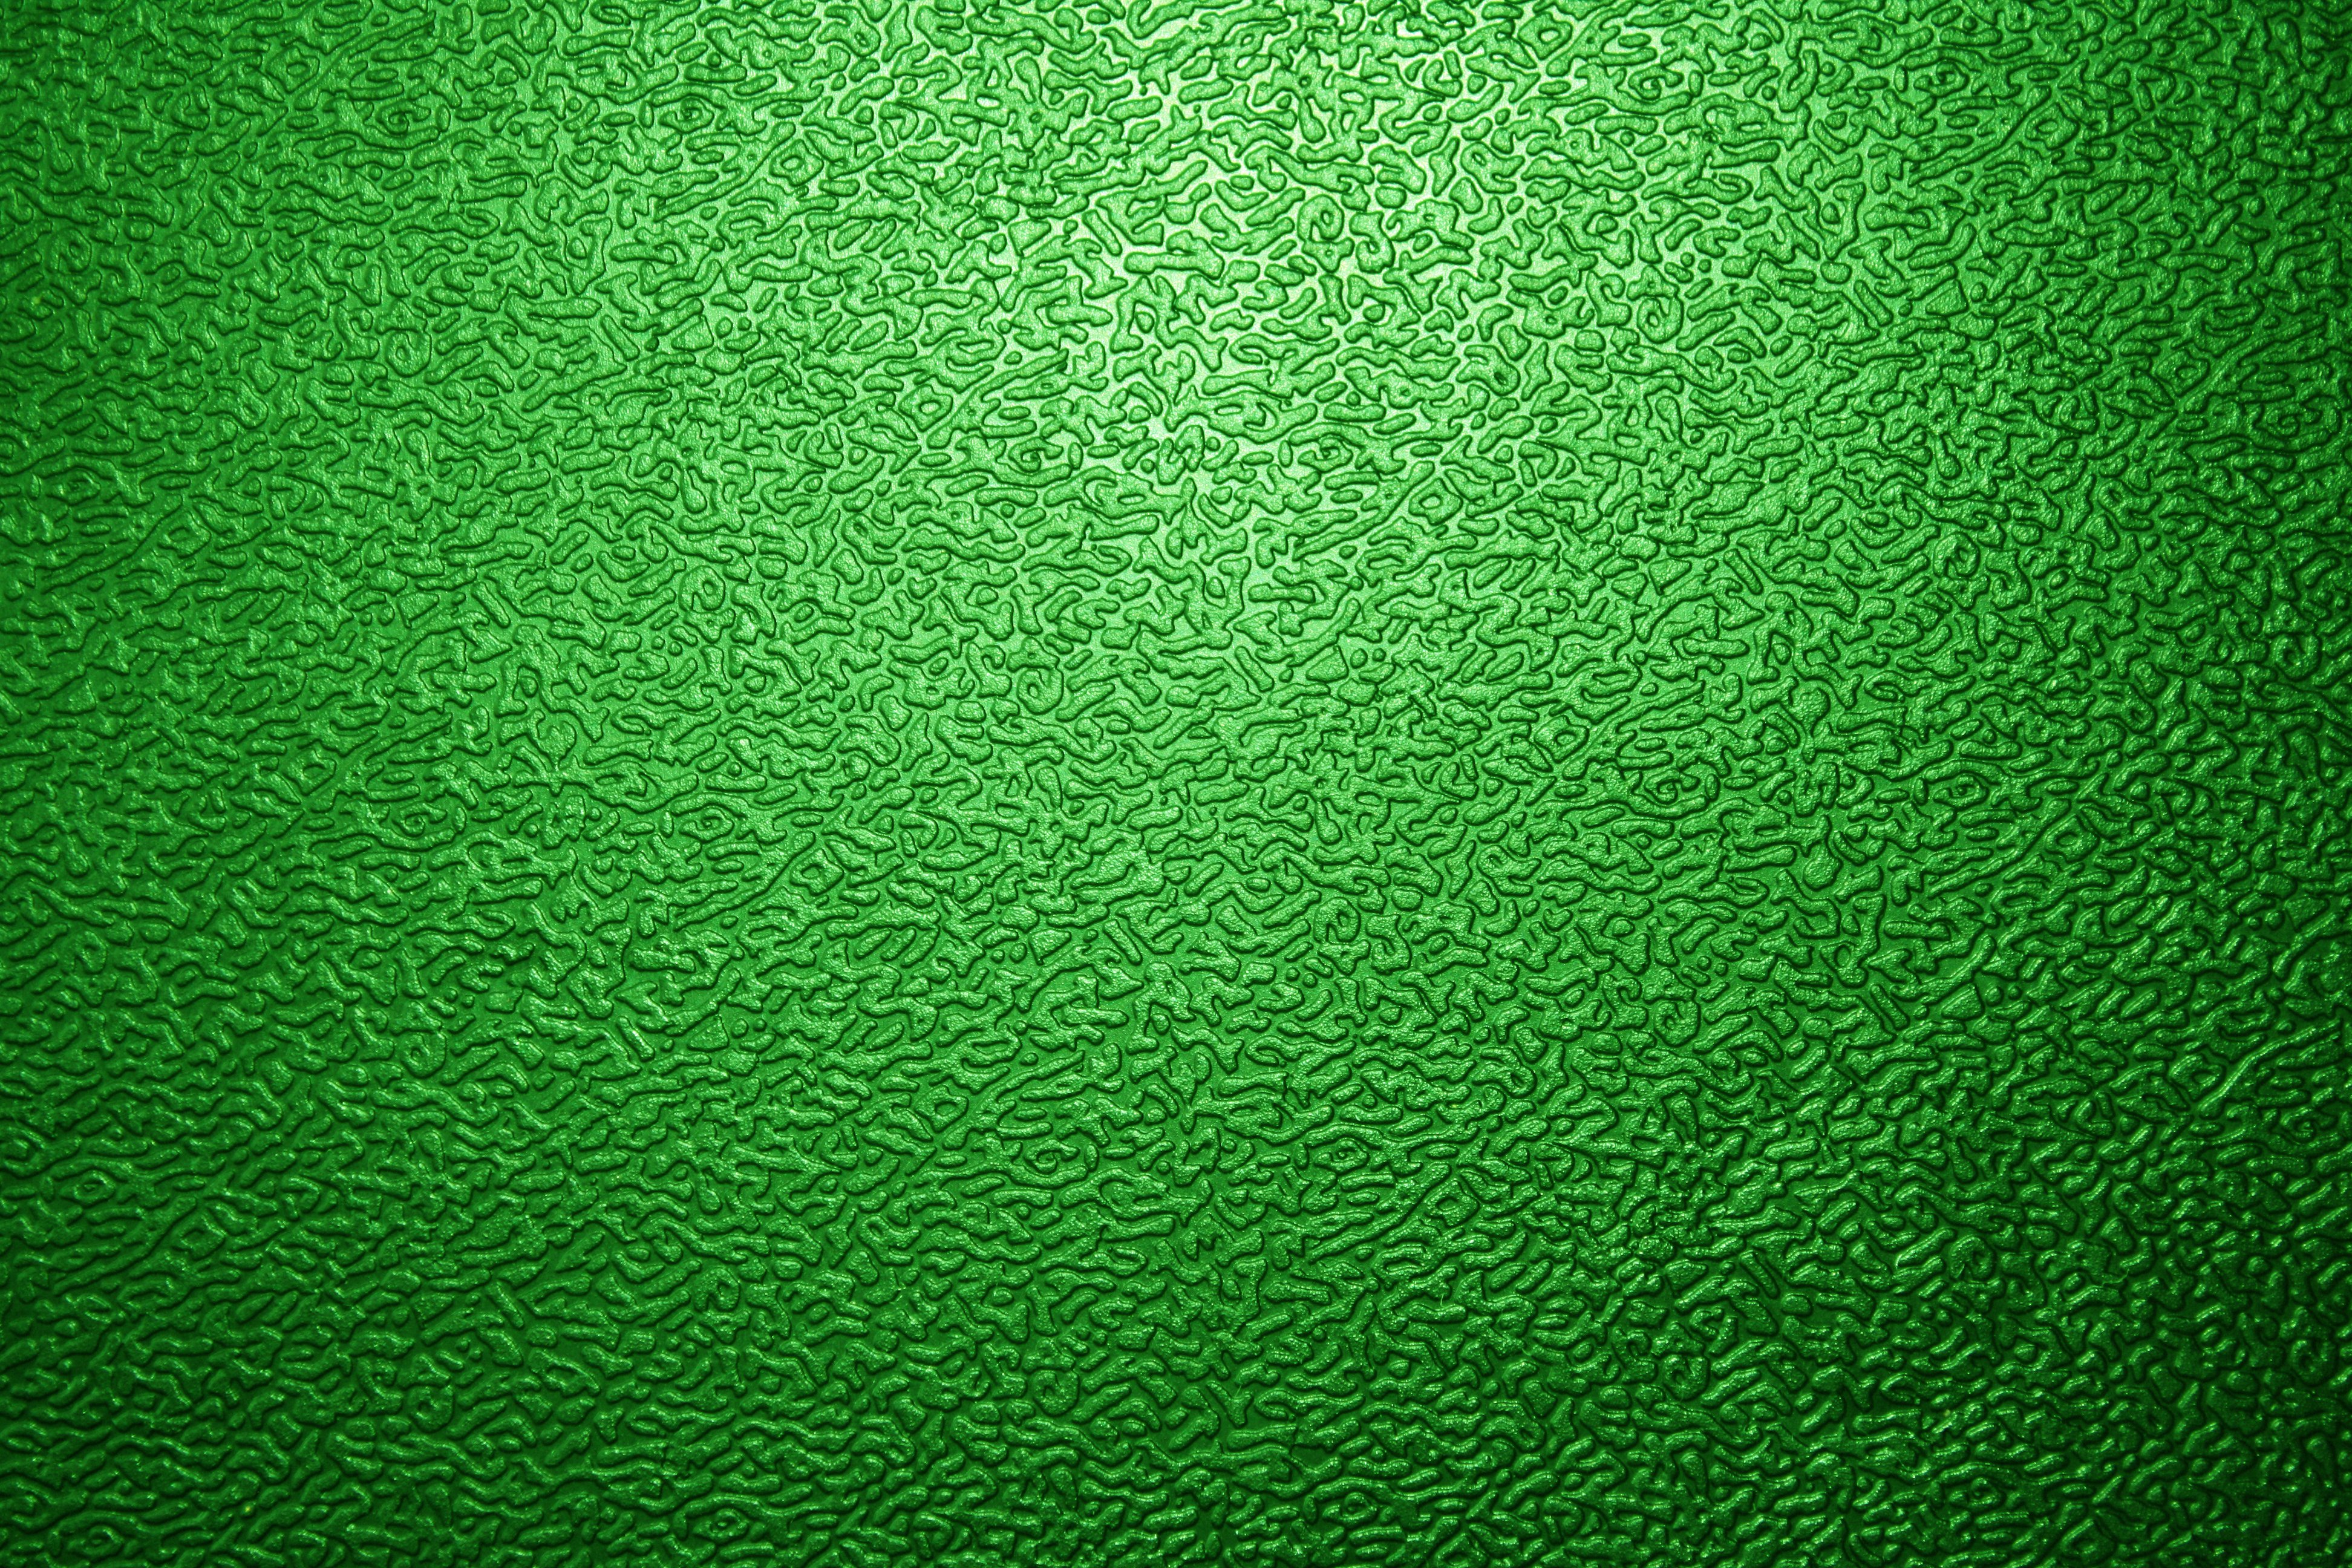 Textured Green Plastic Close Up Picture Photograph